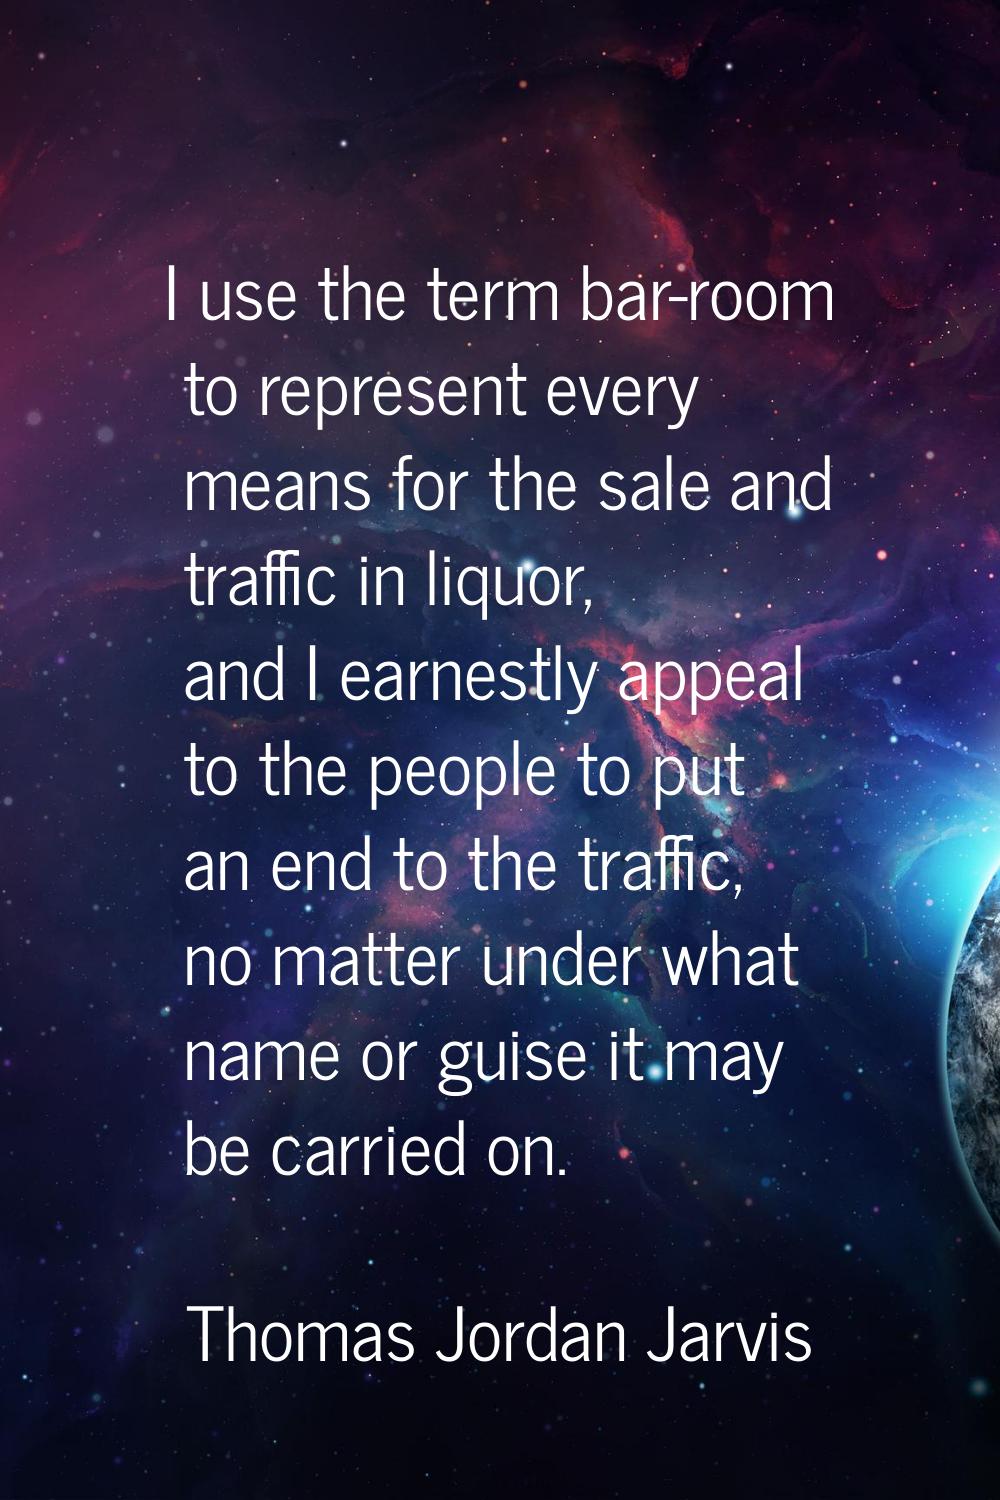 I use the term bar-room to represent every means for the sale and traffic in liquor, and I earnestl